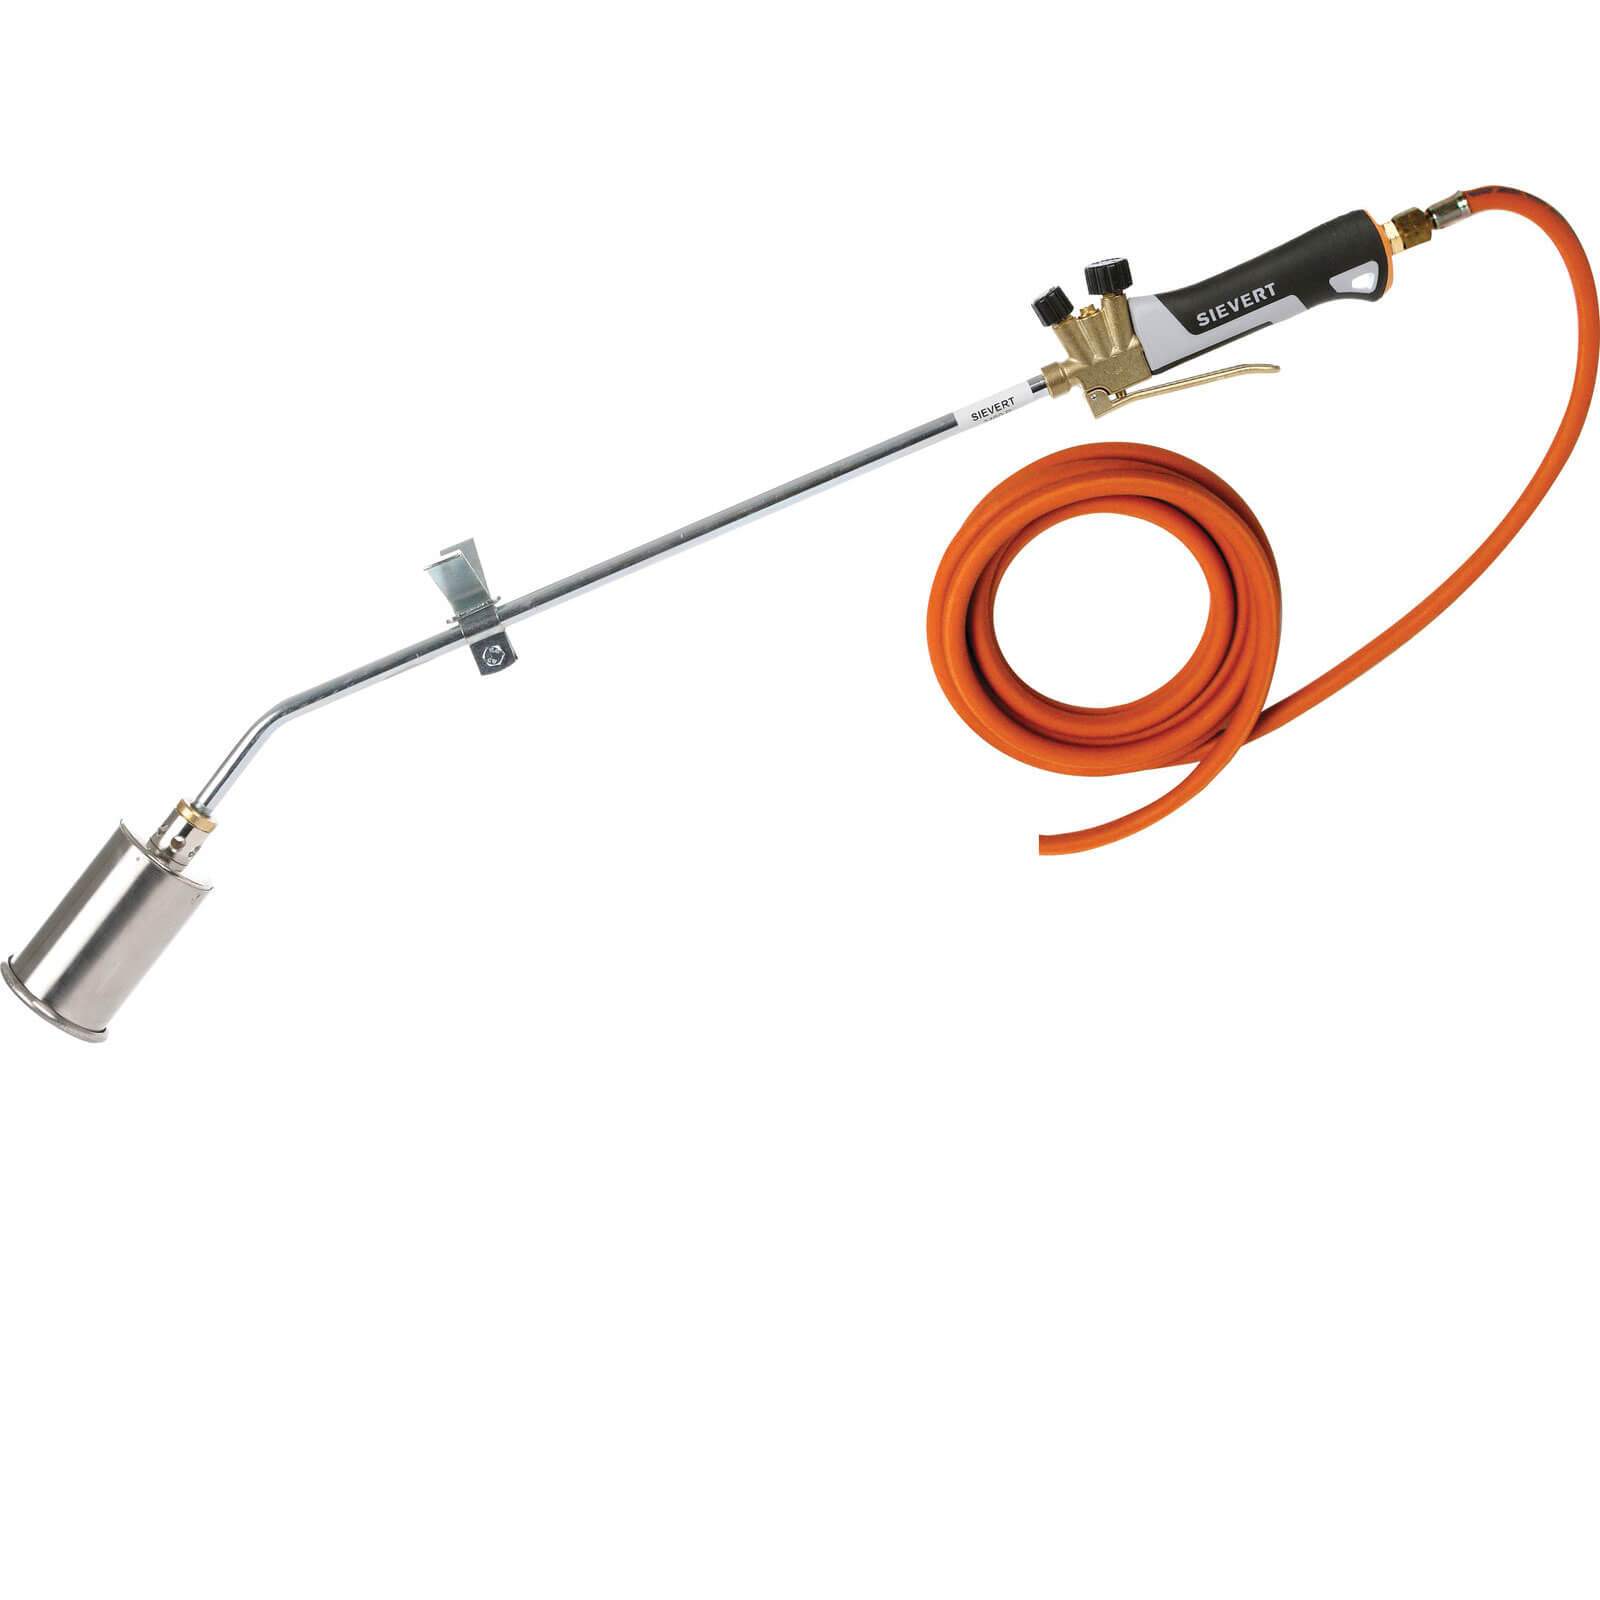 Image of Sievert Turbo Roofing Gas Torch Kit